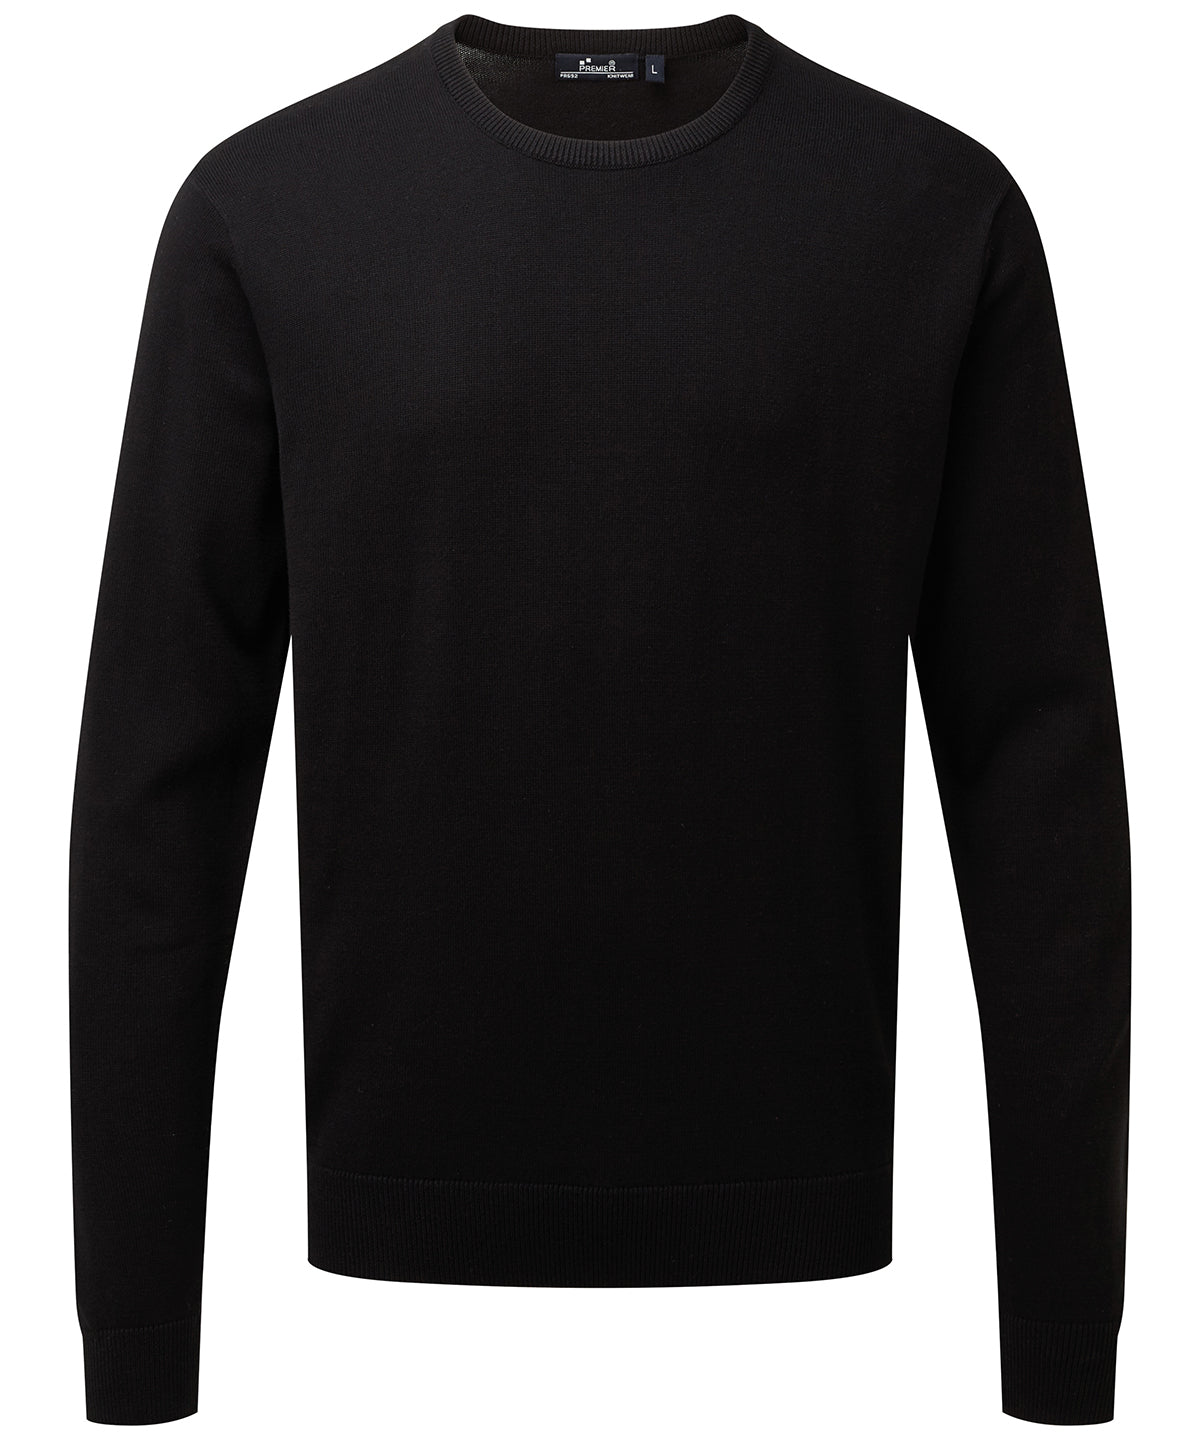 Premier PR692 Mens Crew Neck Cotton-rich Knitted Sweater Jumpers - COOZO